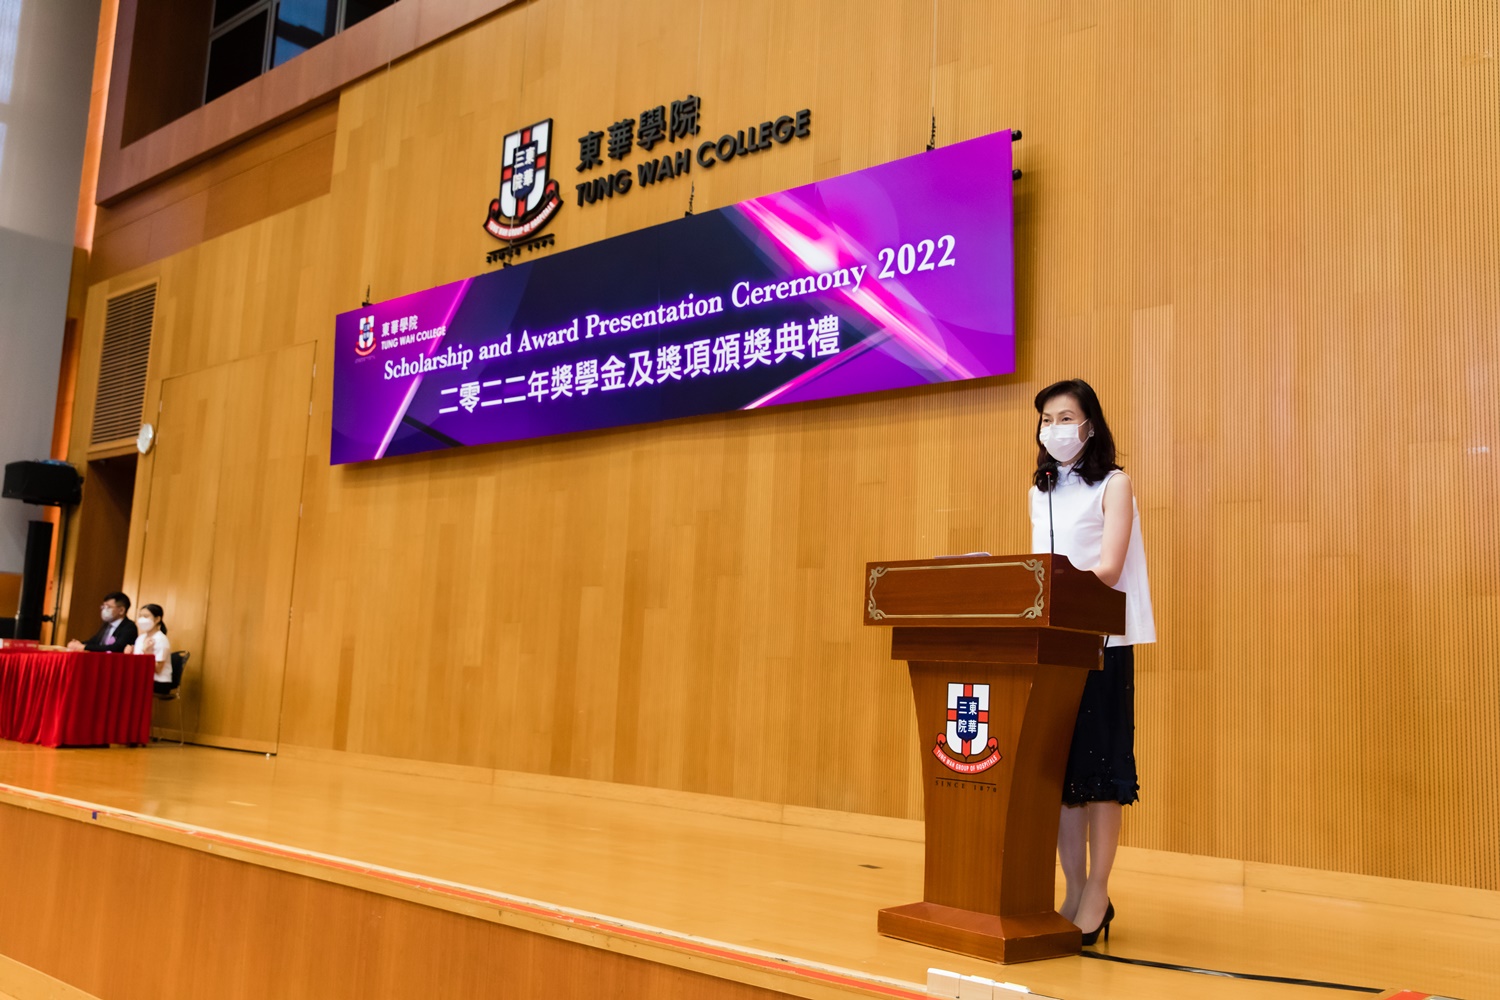 Mrs. Viola Chan Man Yee-wai, BBS, Chairman of College Council of TWC thanked the donors for their generous support and recognised the awardees for their hard work.